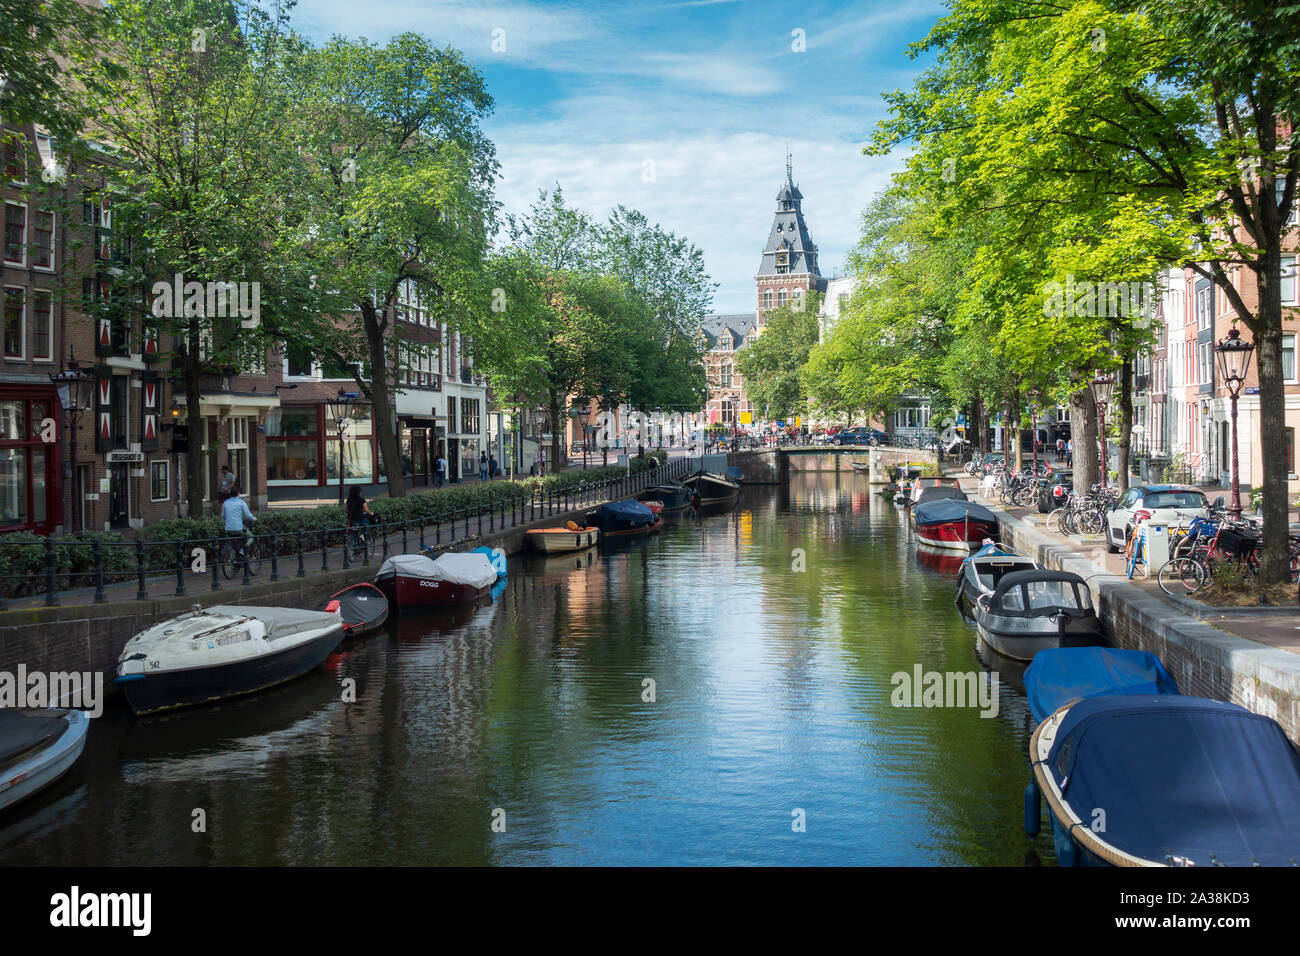 Boats line the canals of Amsterdam, Netherlands, Europe Stock Photo